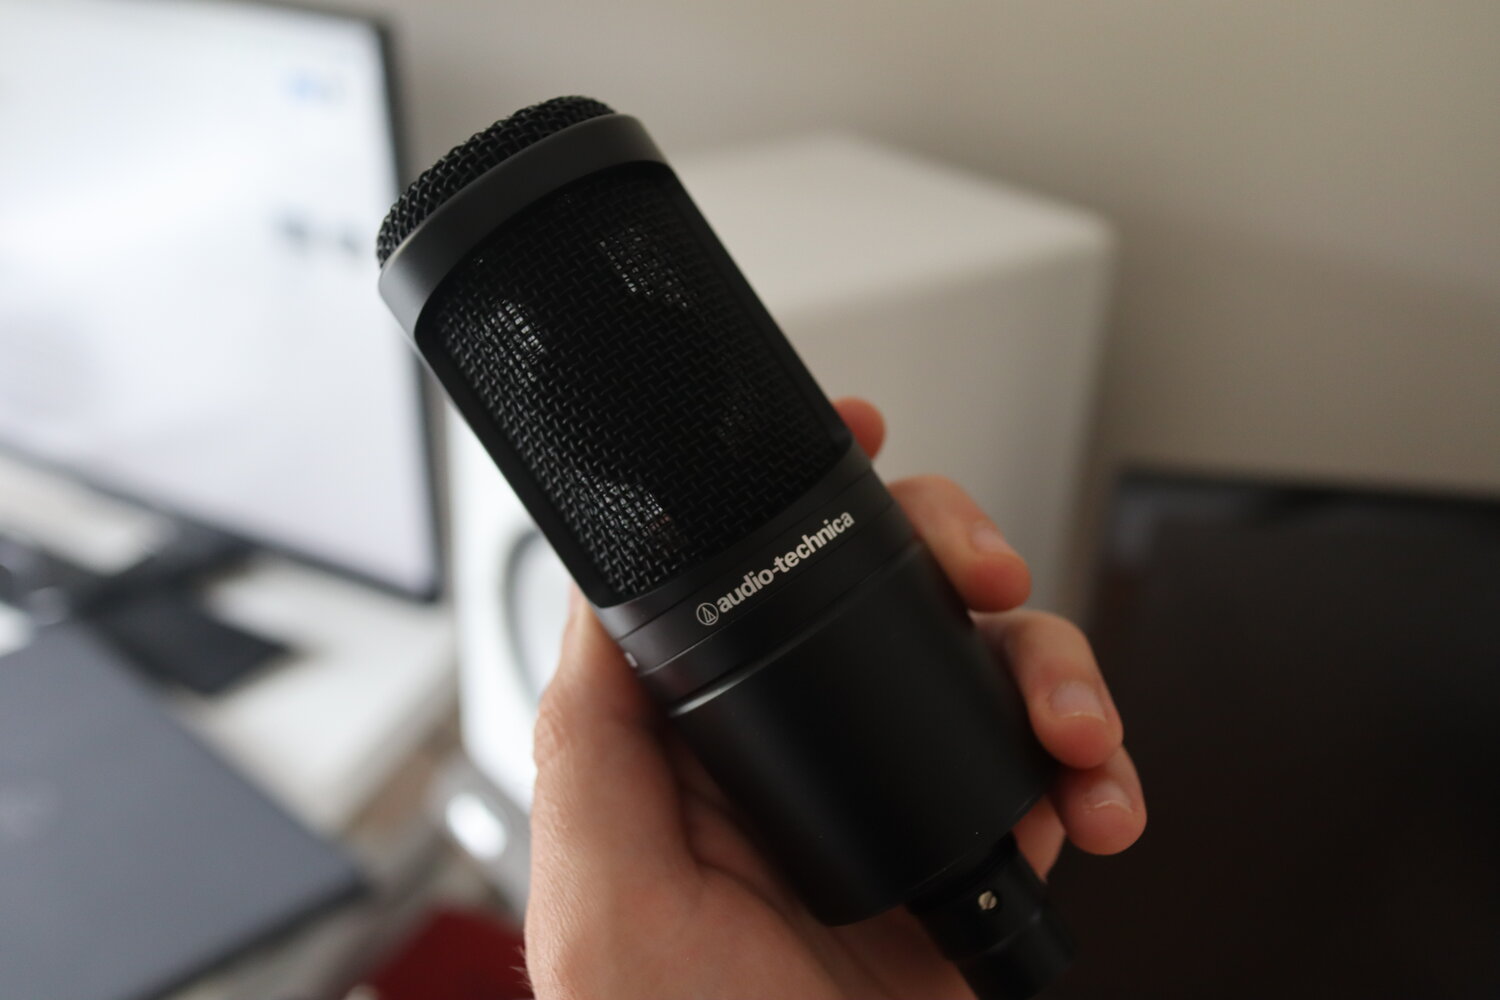 How To Remove Background Noise From A USB Microphone